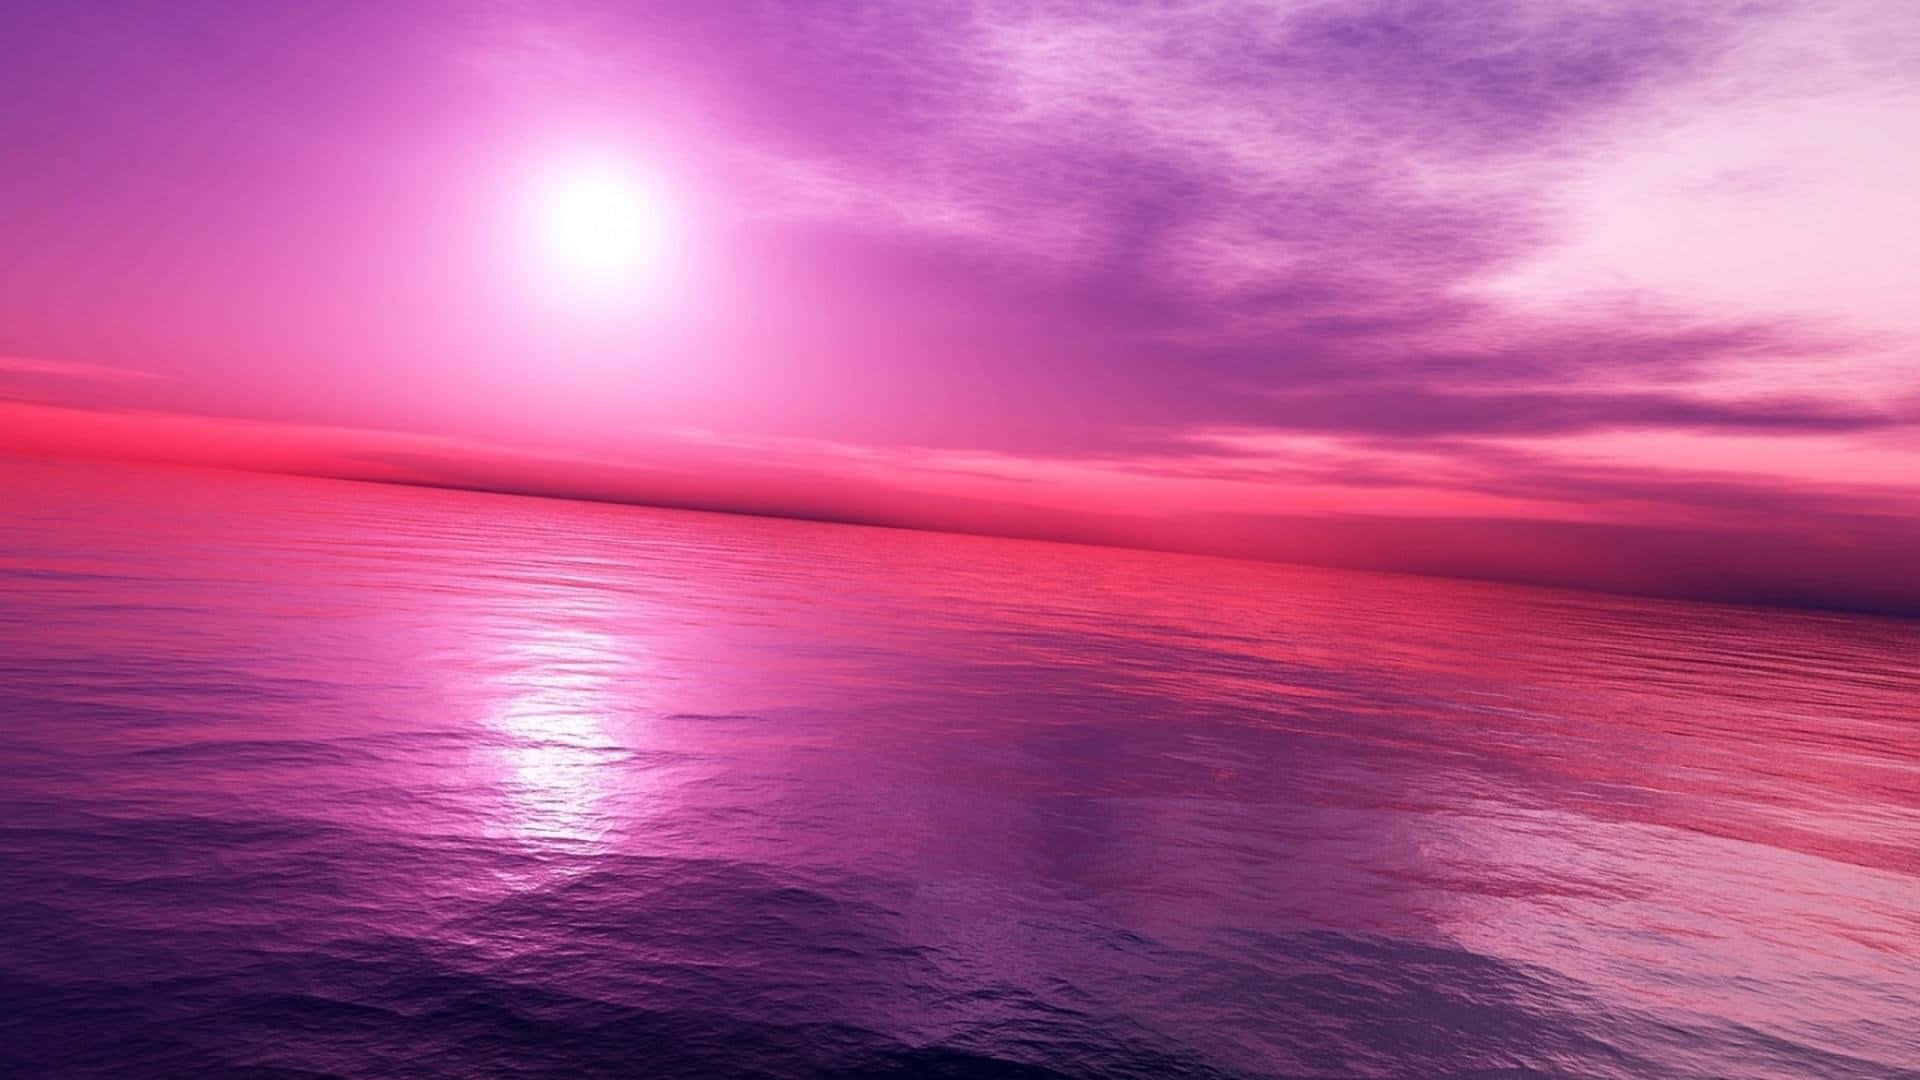 Download Tranquil Pink Sky at Sunset Wallpaper | Wallpapers.com